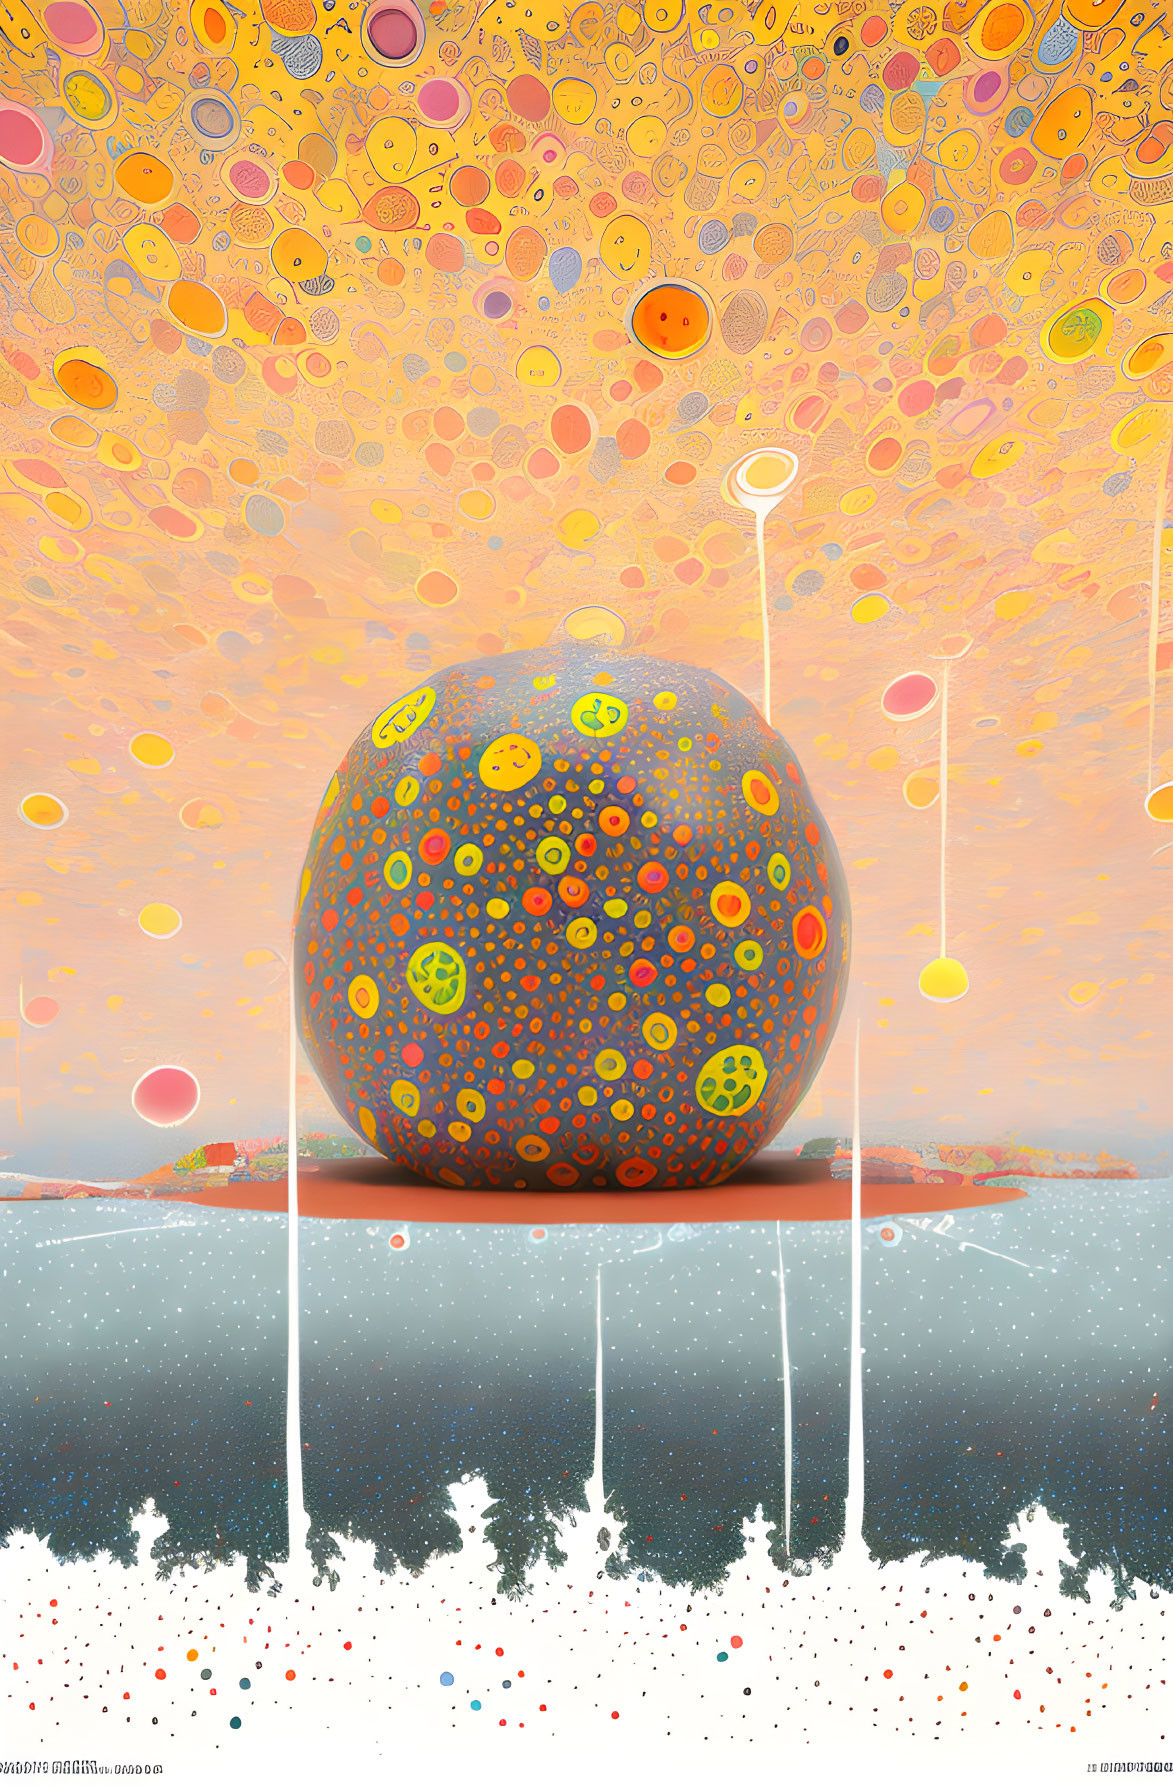 Vibrant surreal landscape with egg-shaped object and floating orbs